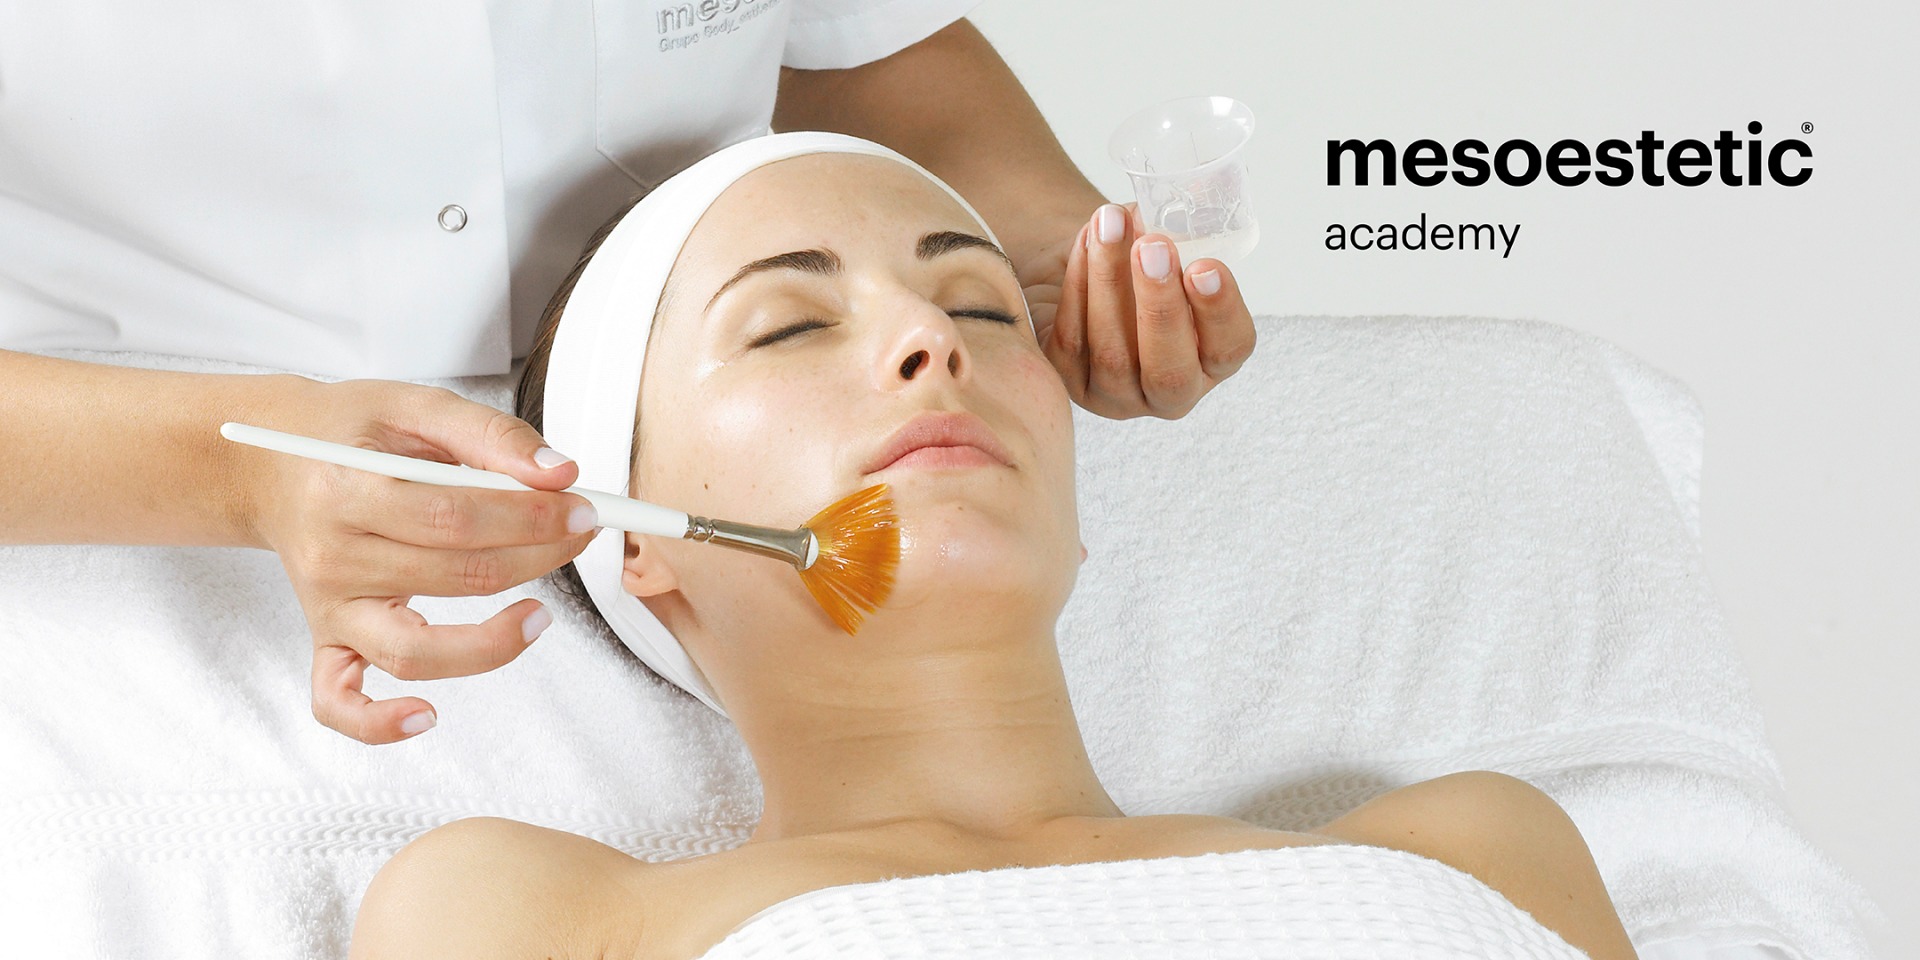 peeling application of an antiaging treatment